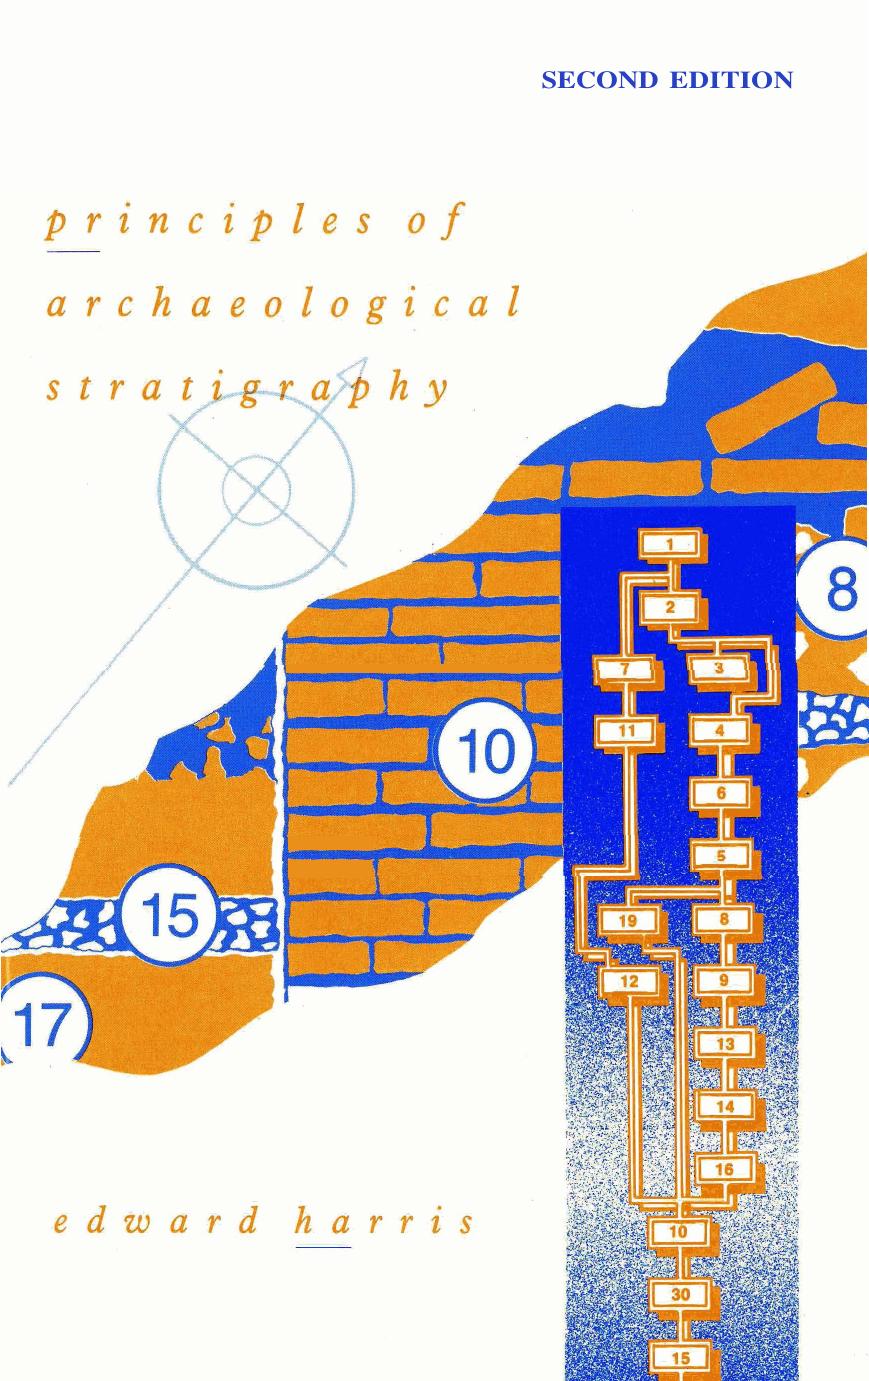 Principles of Archaeological Stratigraphy, Second Edition1989